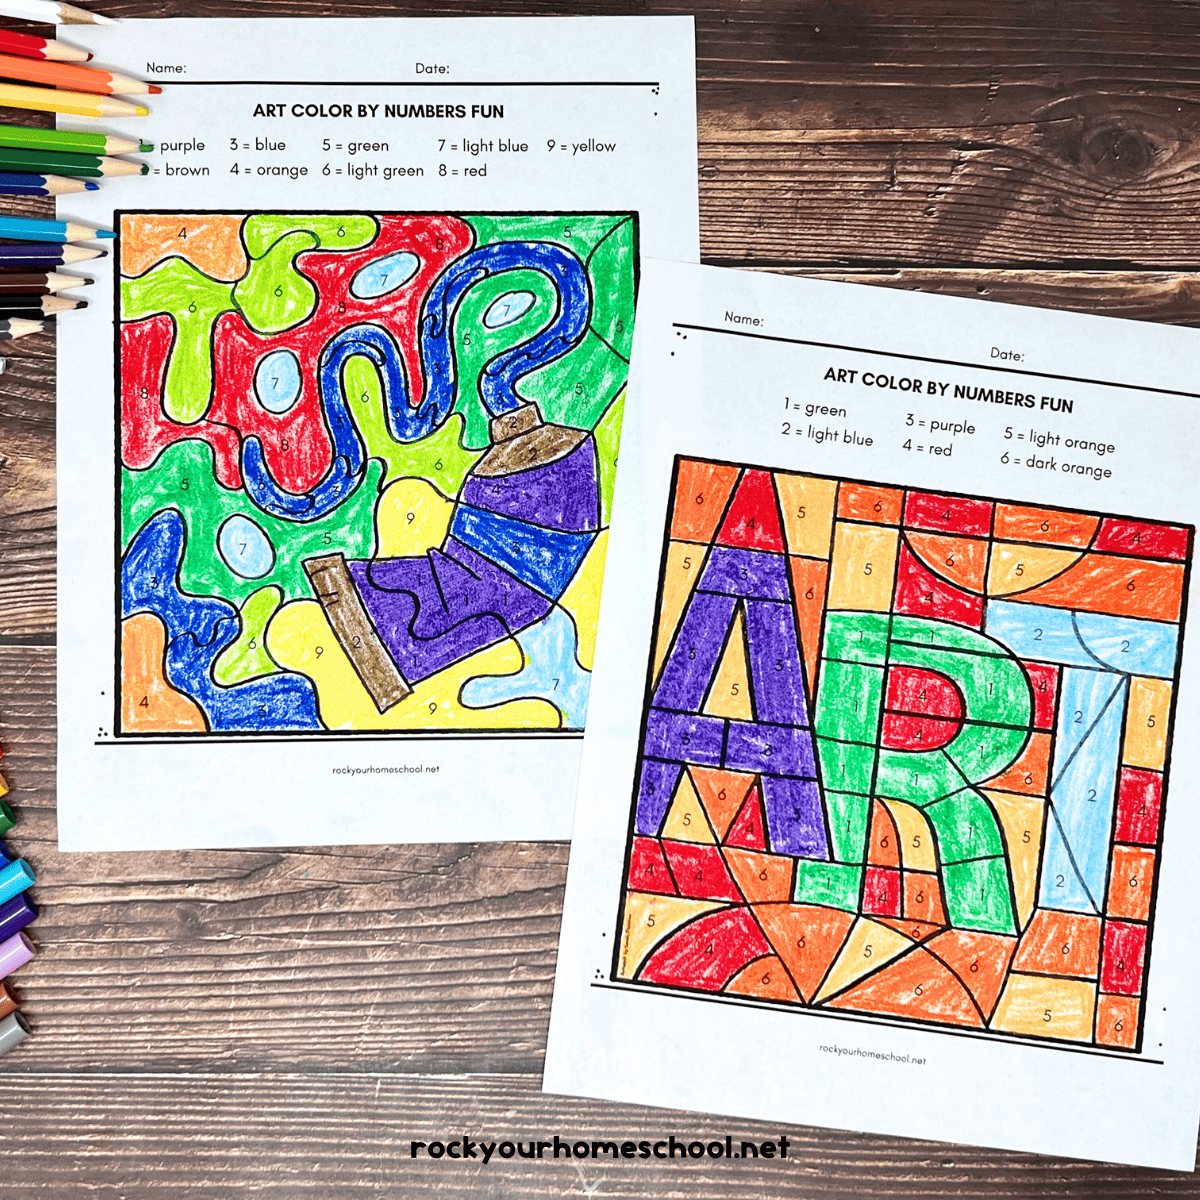 Two examples of art color by number printable pages featuring paint tube and the word "ART".